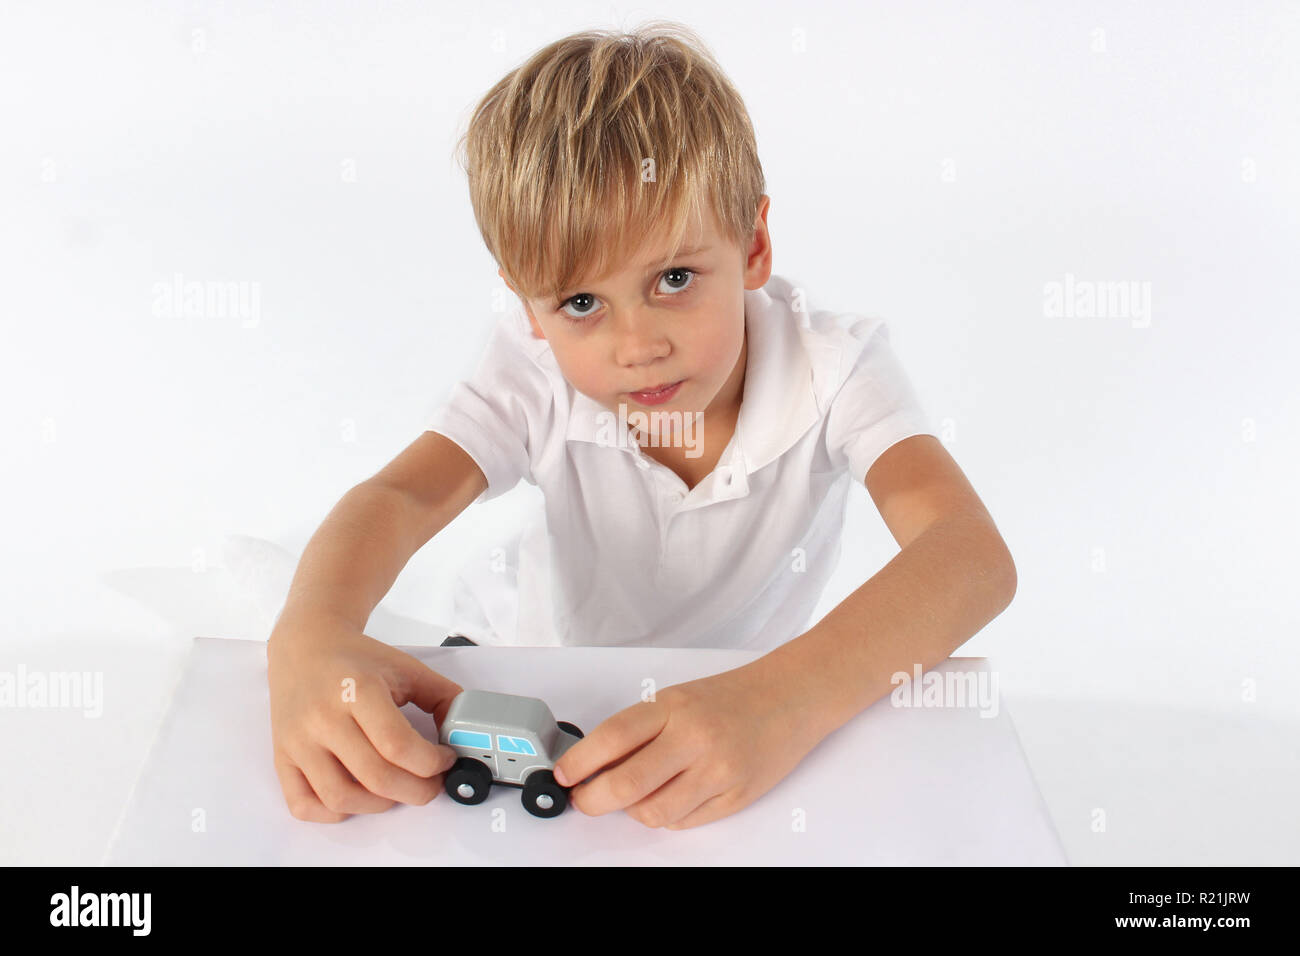 Adorable little boy playing with a small wooden car toy Stock Photo